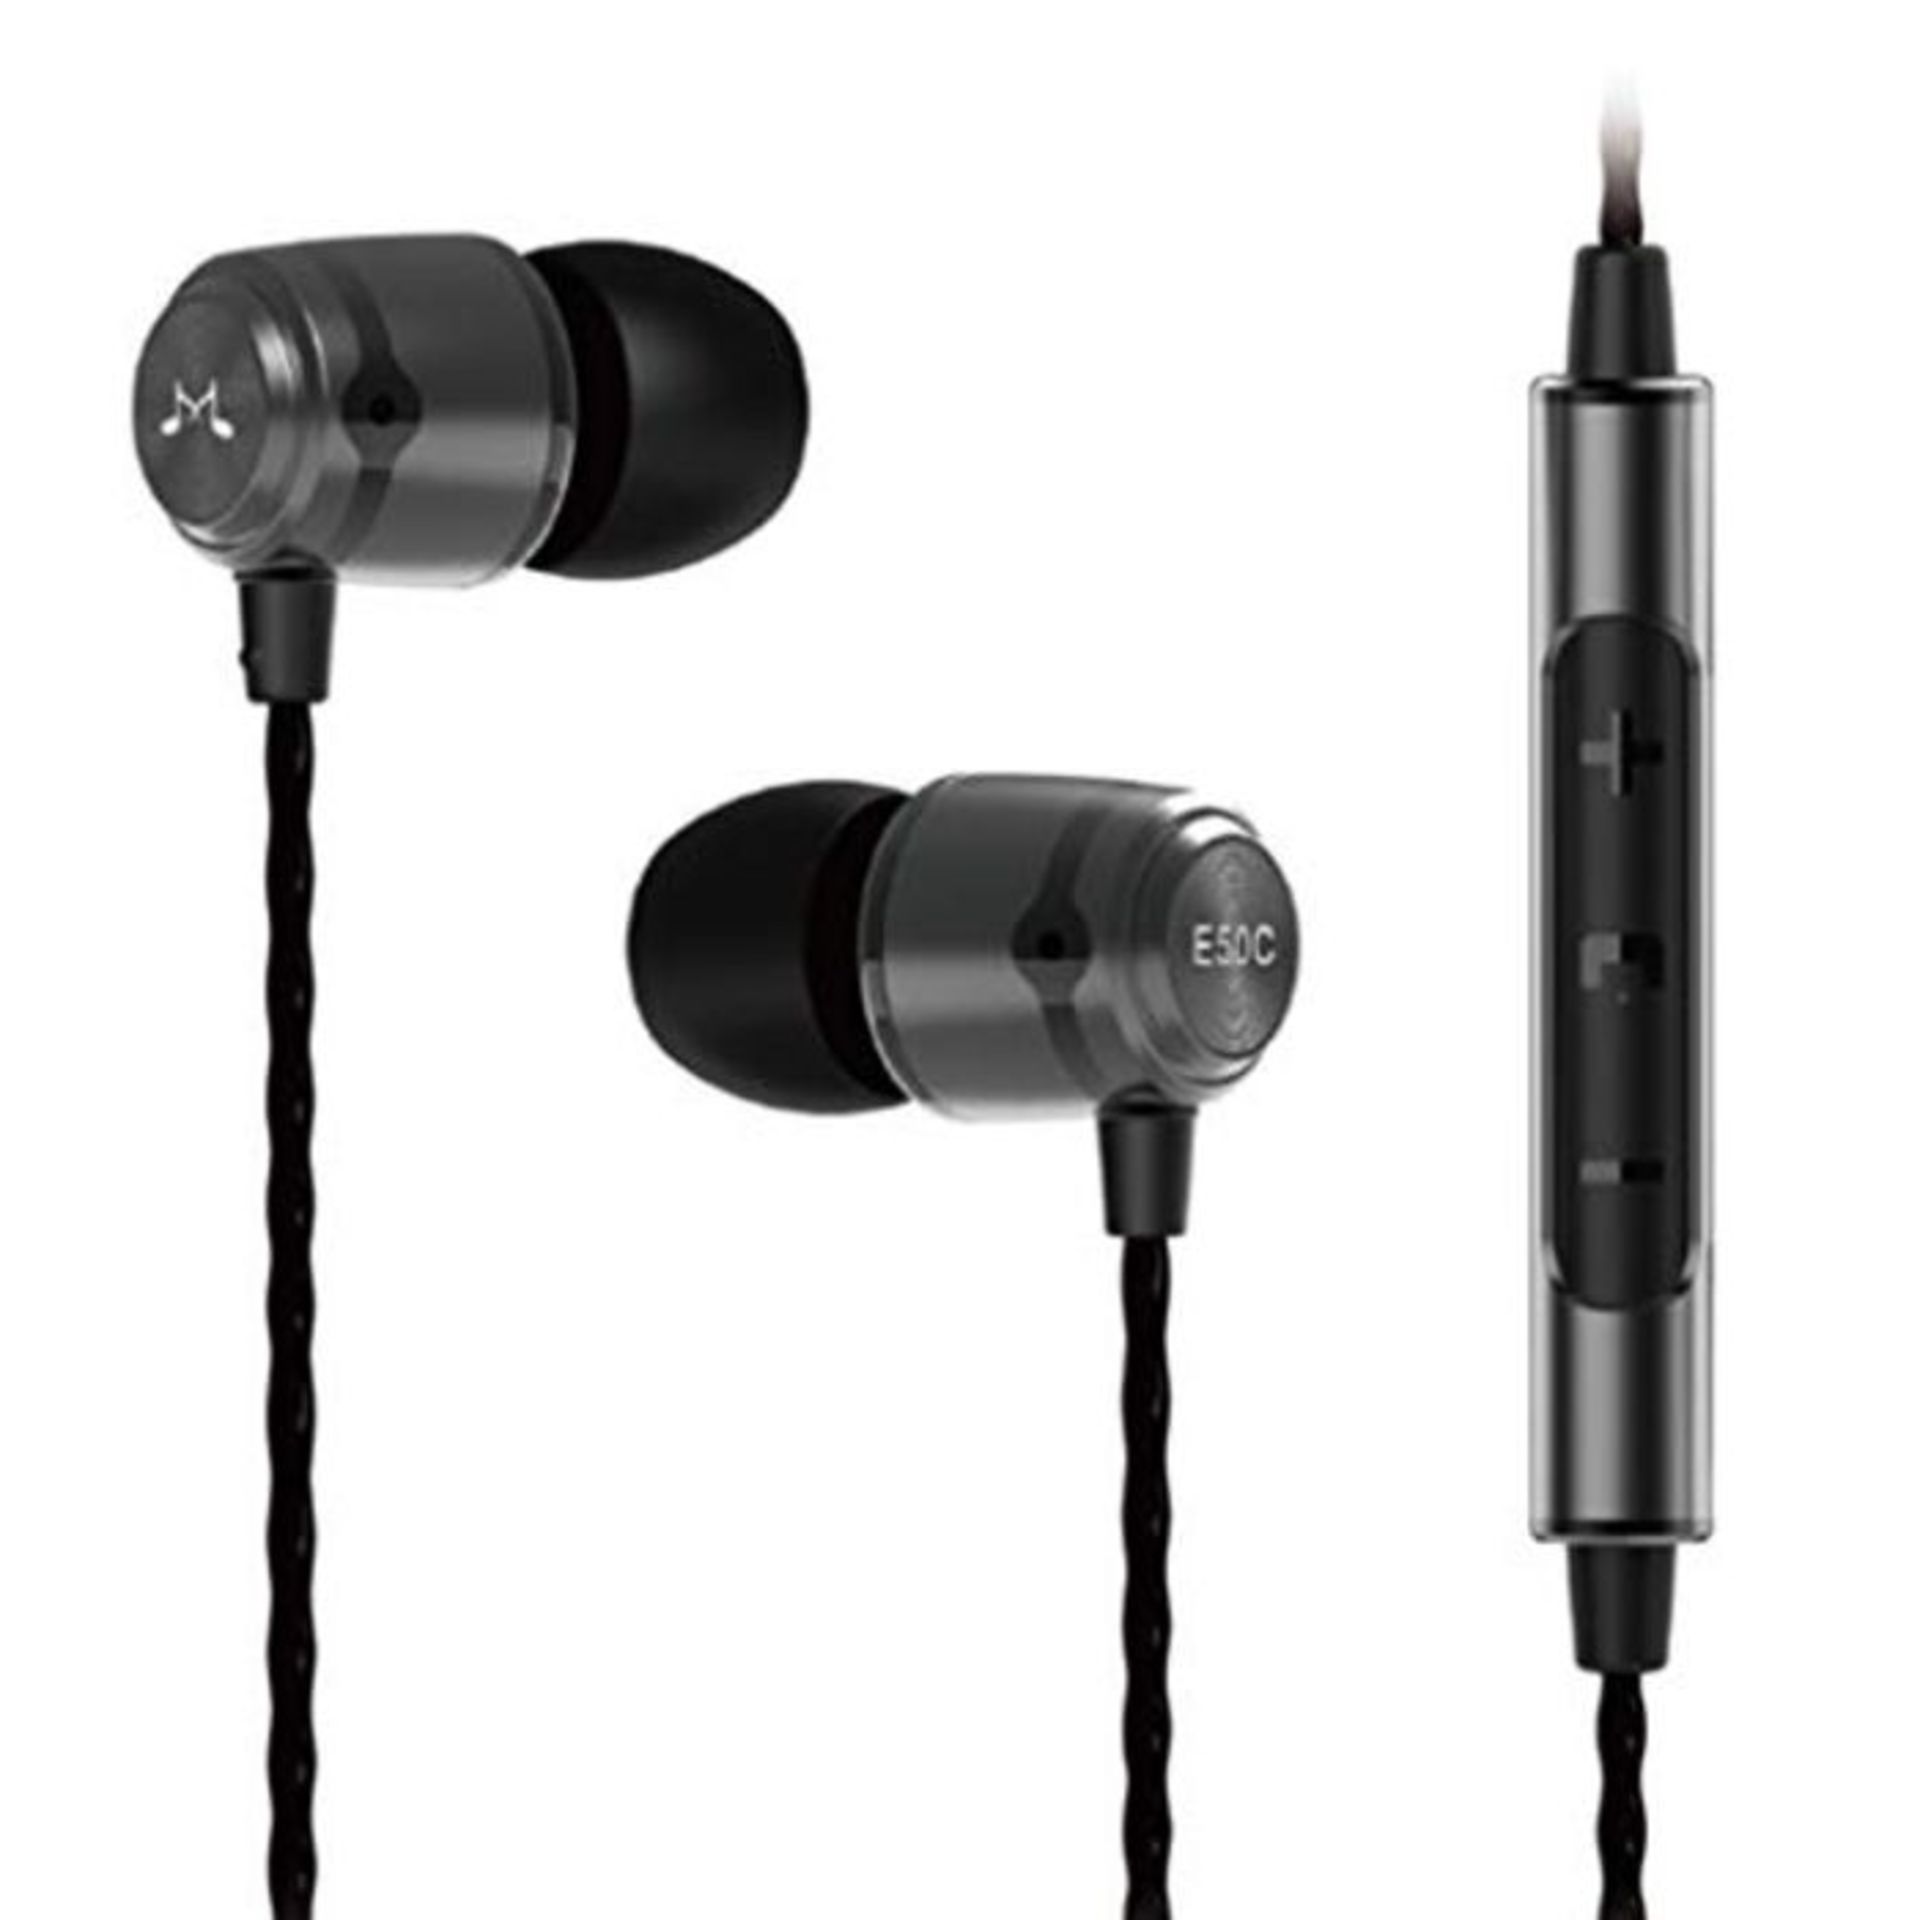 SoundMAGIC E50C Professional Sound Isolating Earphones, In-Ear Monitors, Wired Earbuds